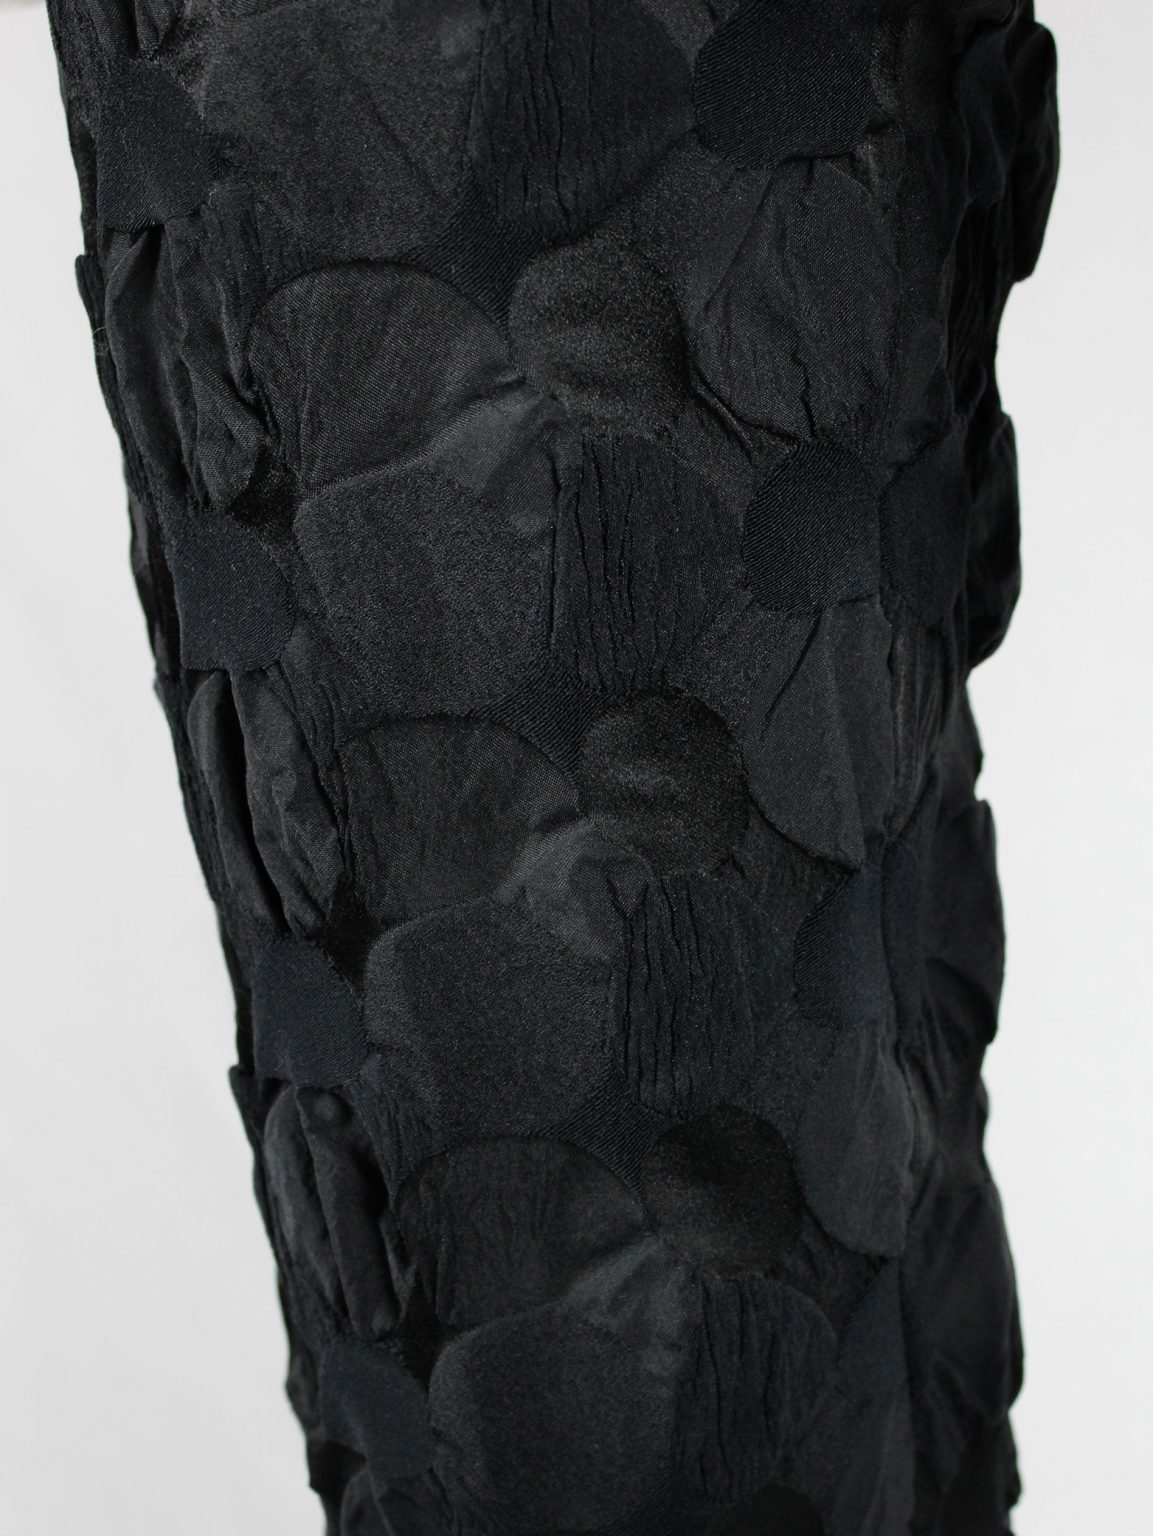 Issey Miyake black trousers with the fabric manipulated into different circles